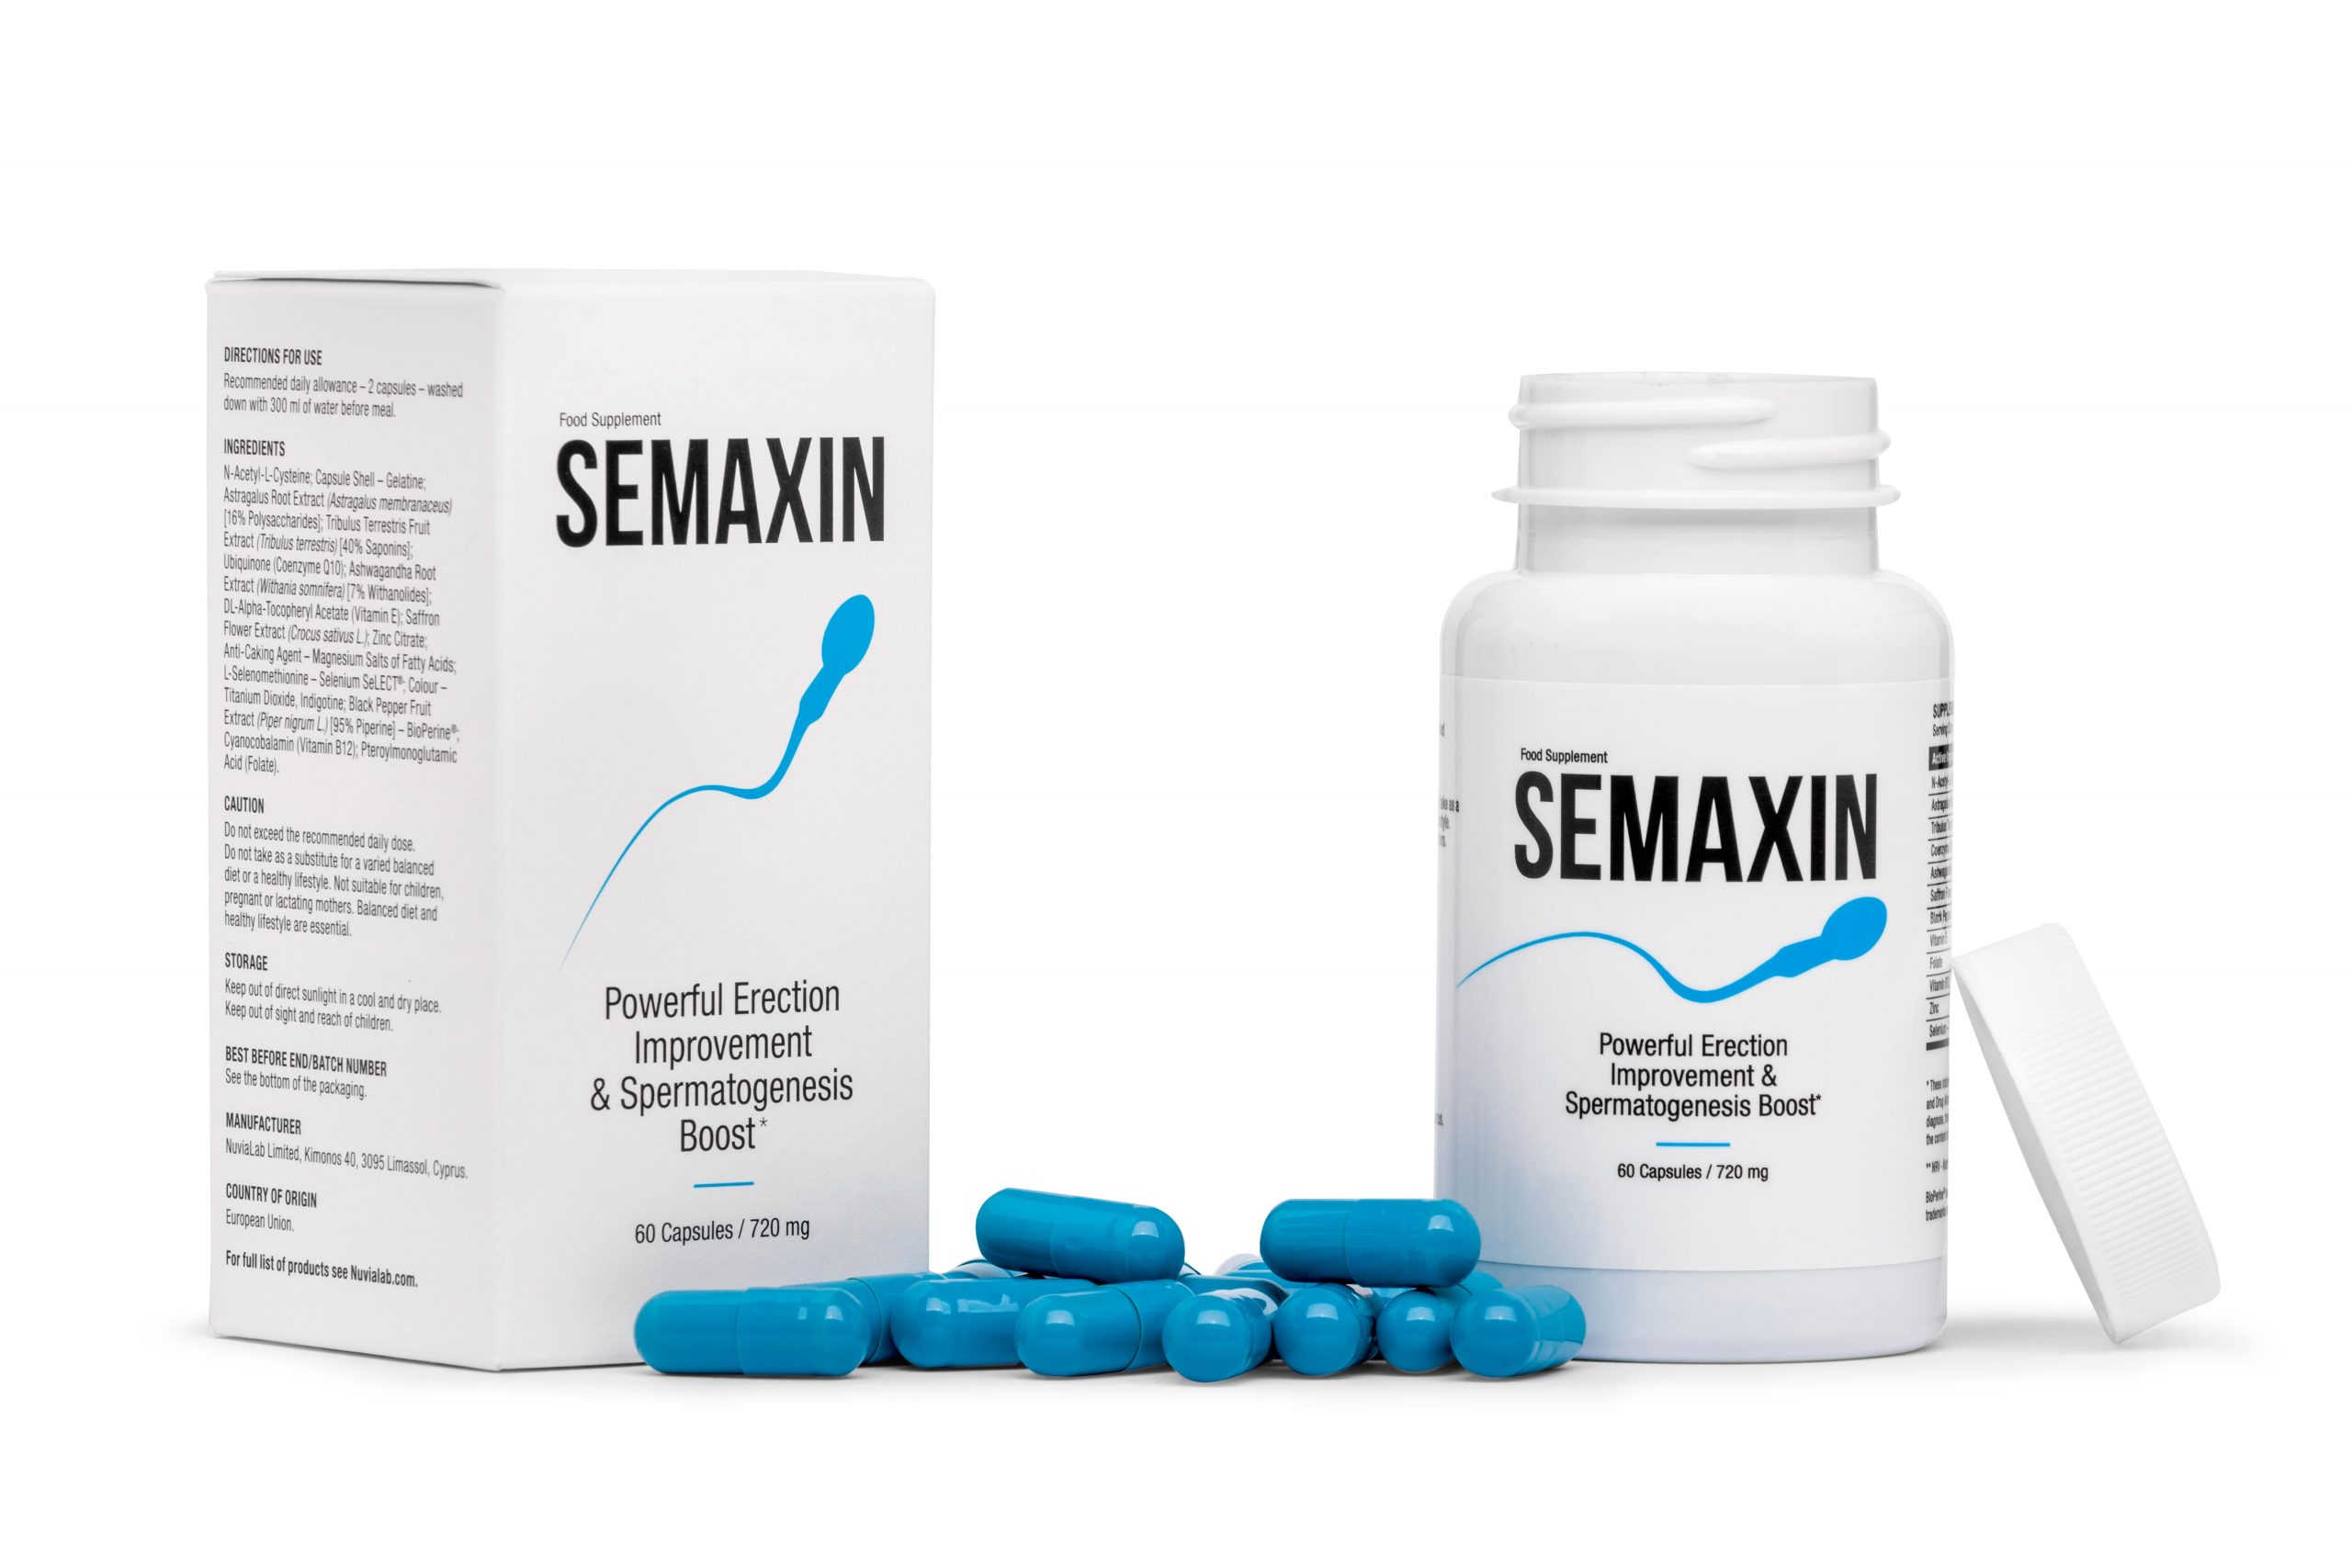 Semaxin-Supports the Process of Spermatogenesis